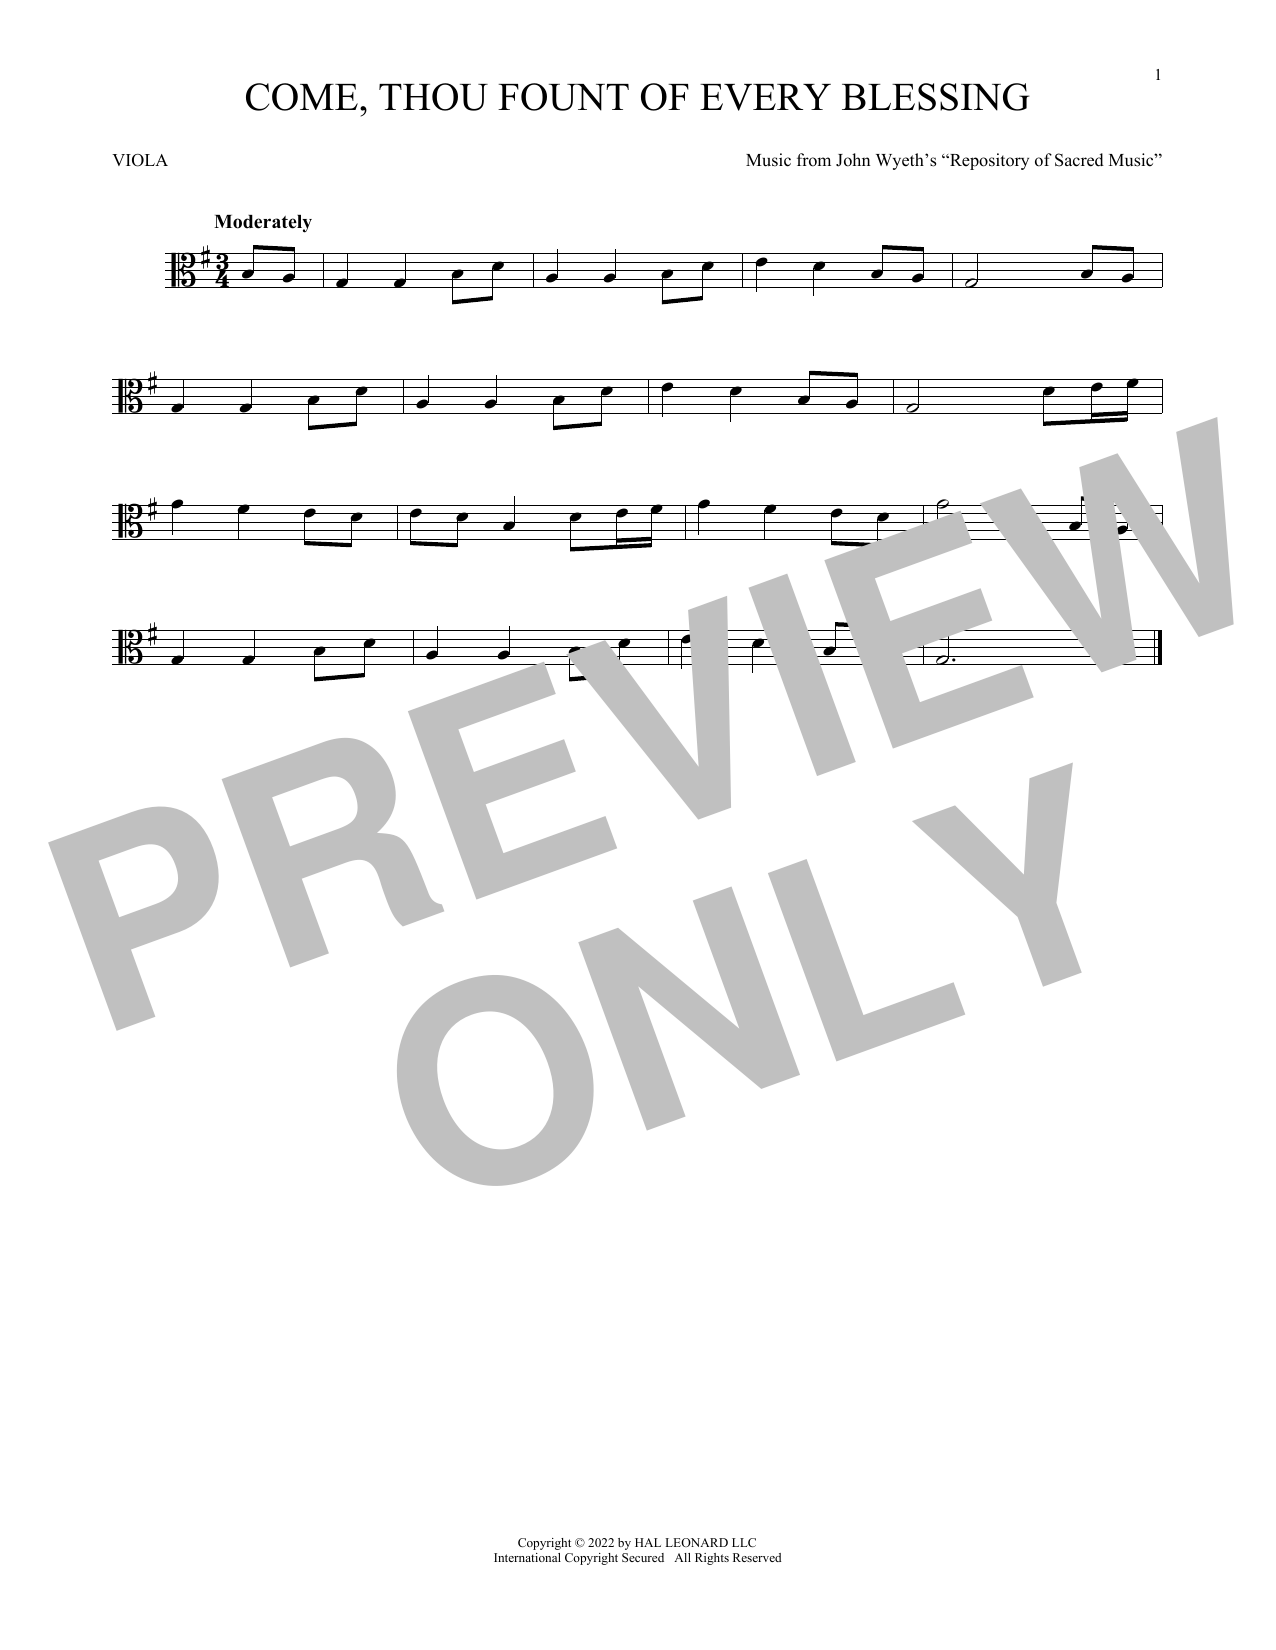 Download Robert Robinson Come, Thou Fount Of Every Blessing Sheet Music